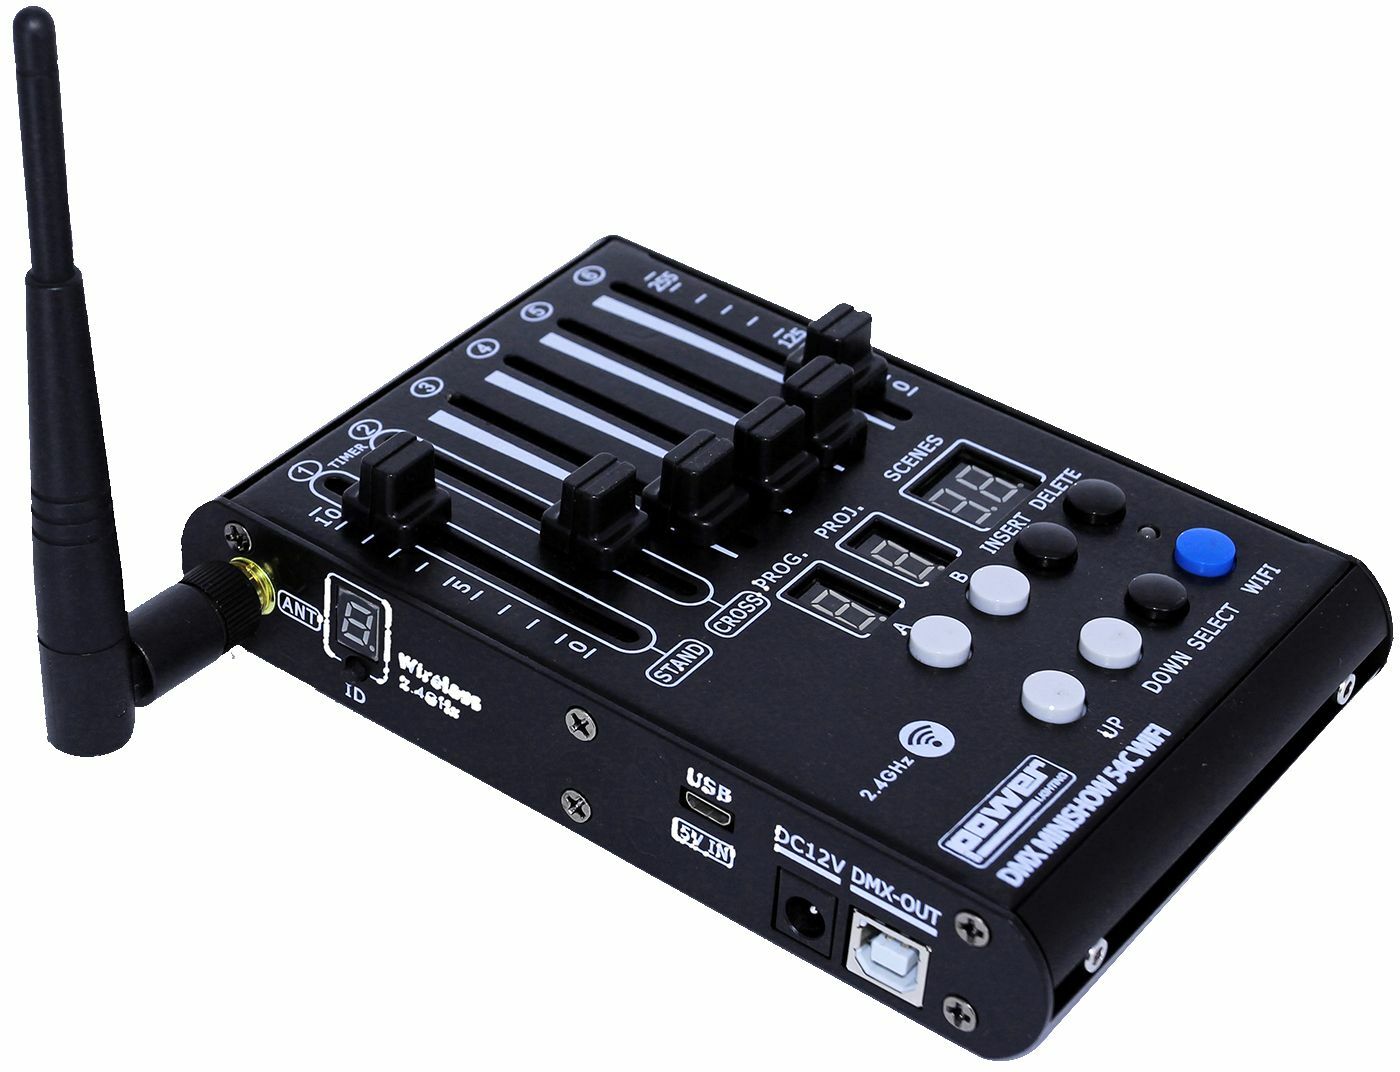 Sogetronic Dmx Minishow 54c Wifi - DMX Controller & Software - Main picture